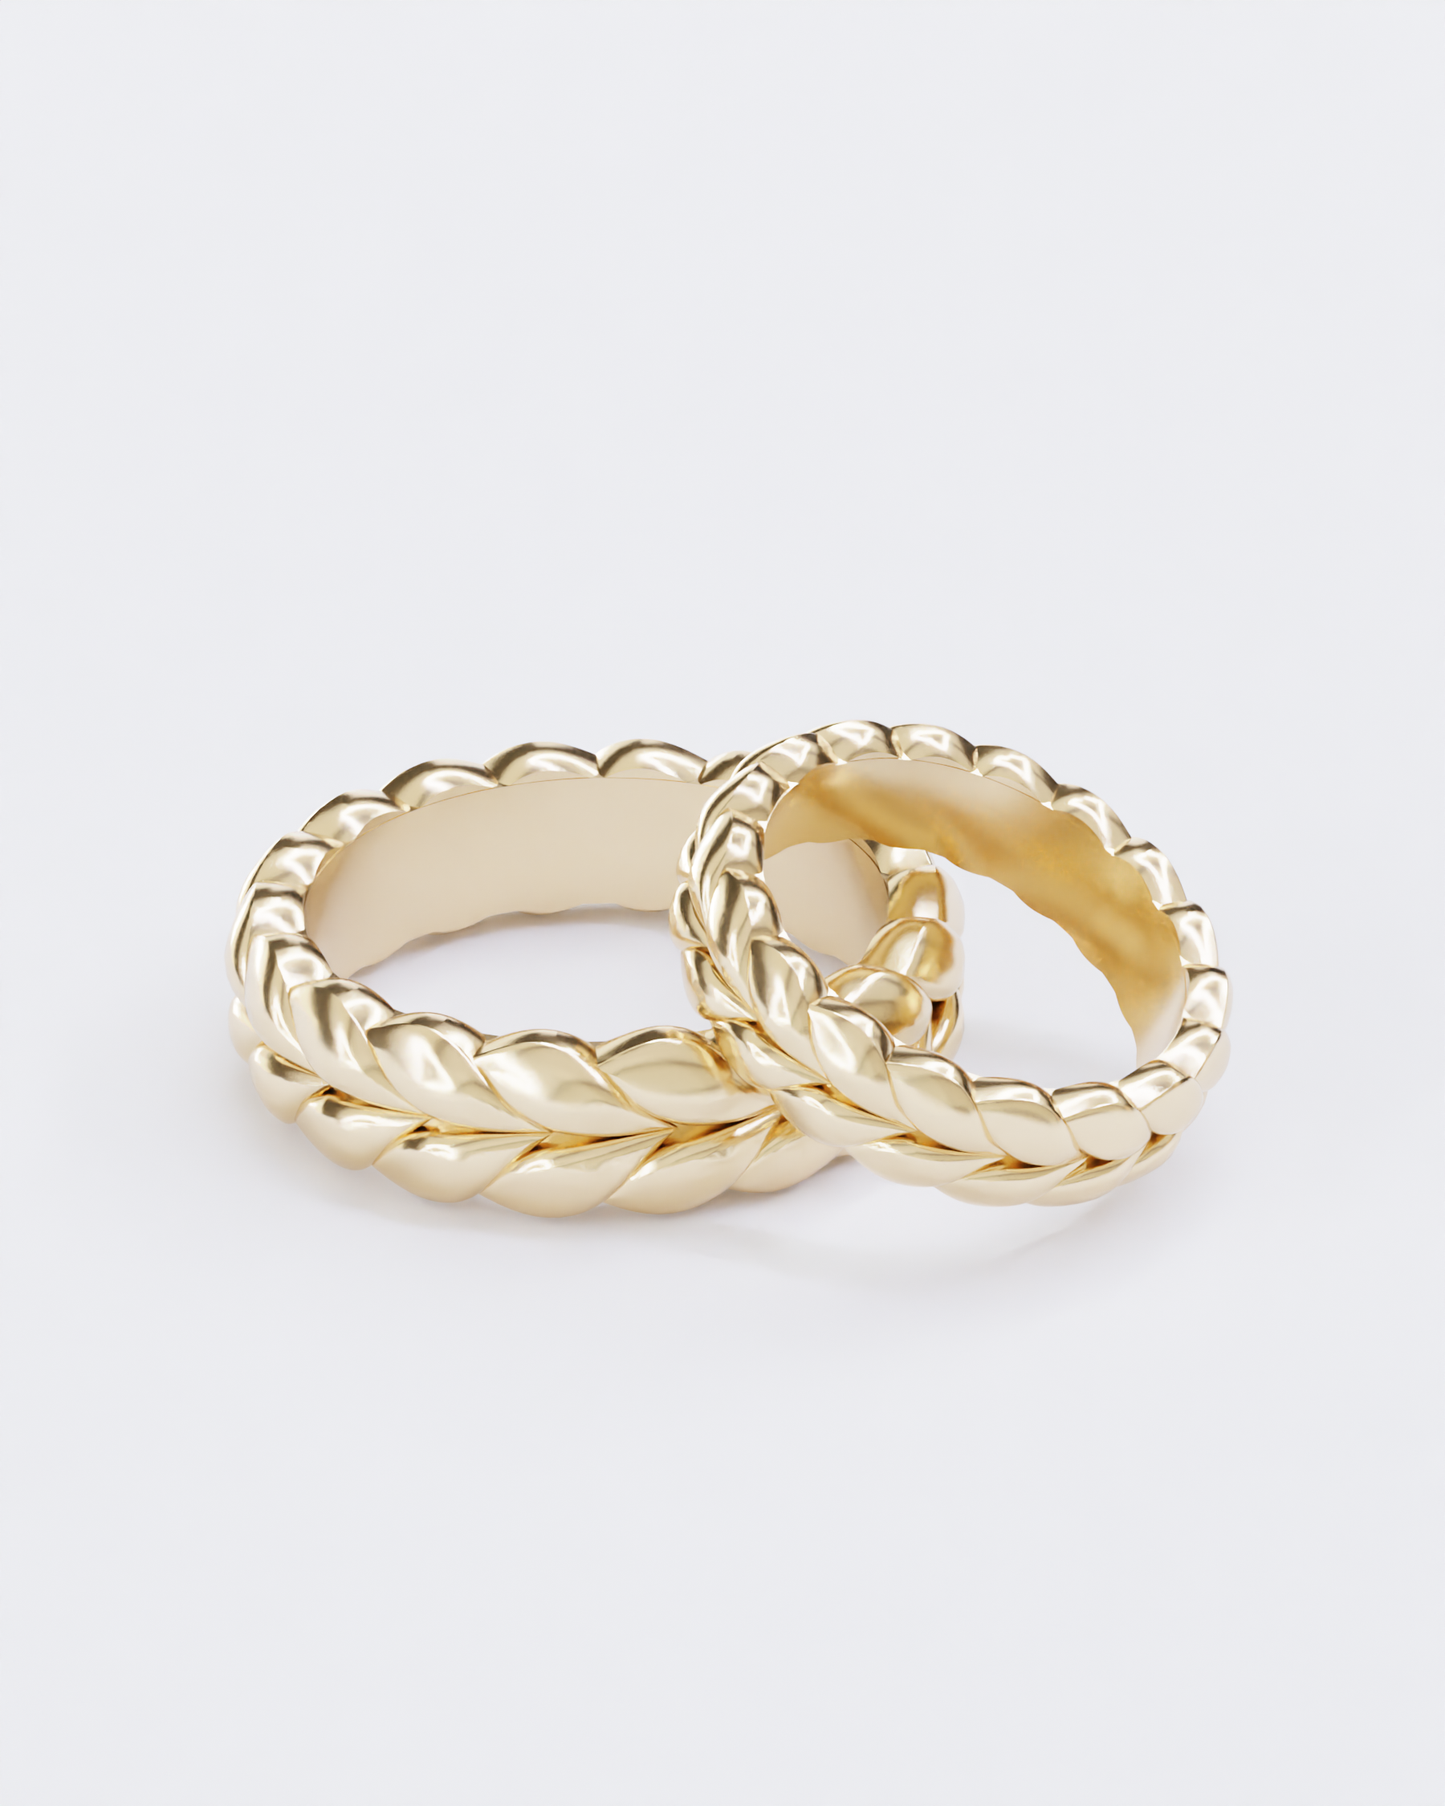 Spikelets gold wedding rings